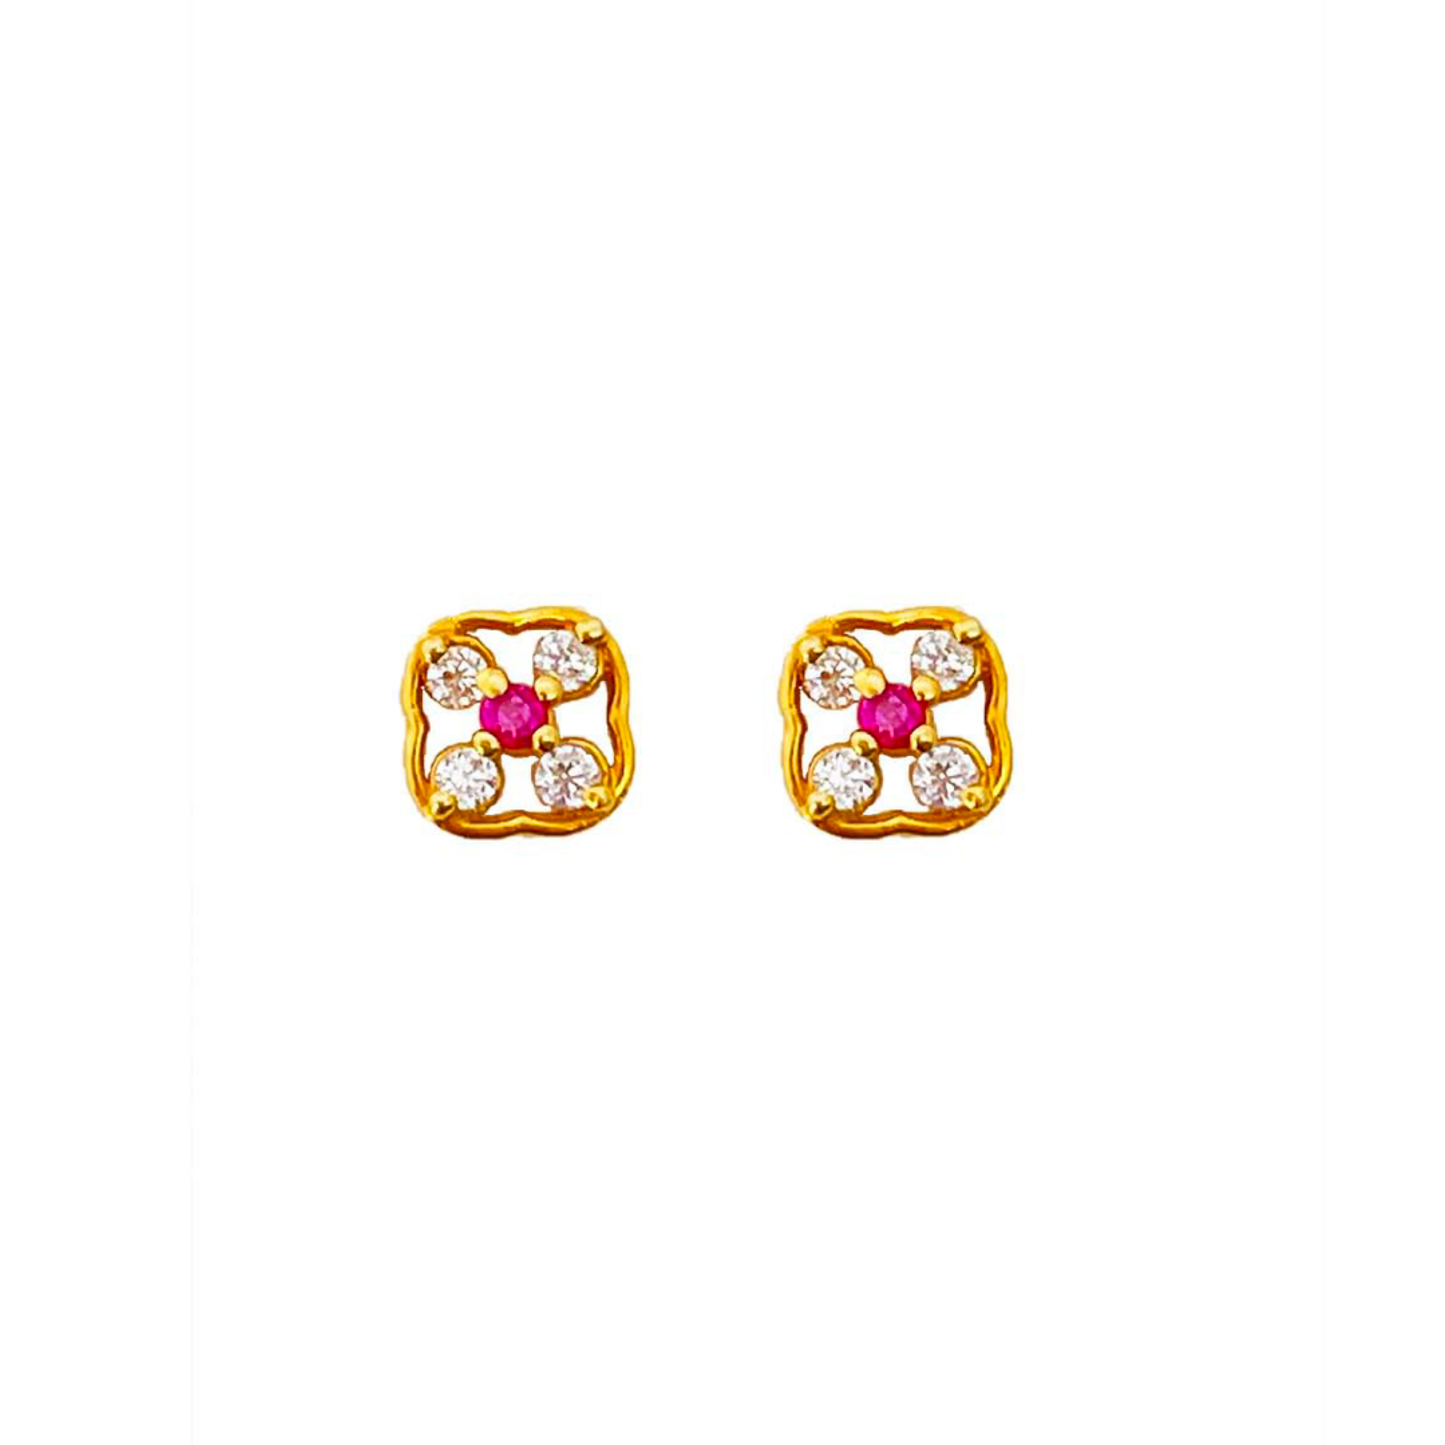 18KT Gold Pink-White Square Stone Stud Earrings.